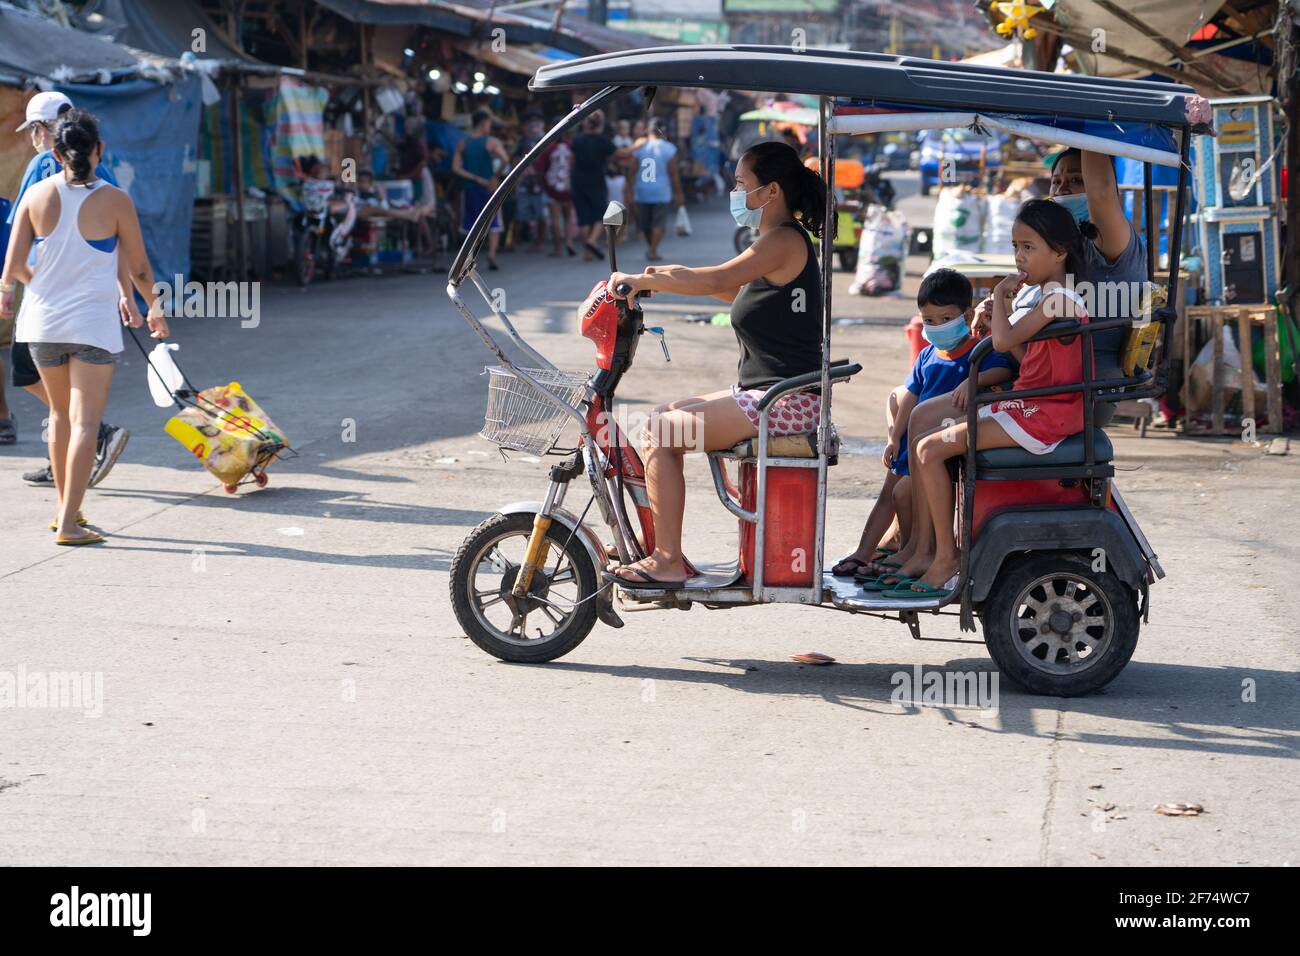 A woman driving a three wheeled  electric vehicle within a market area, Cebu City, Philippines Stock Photo